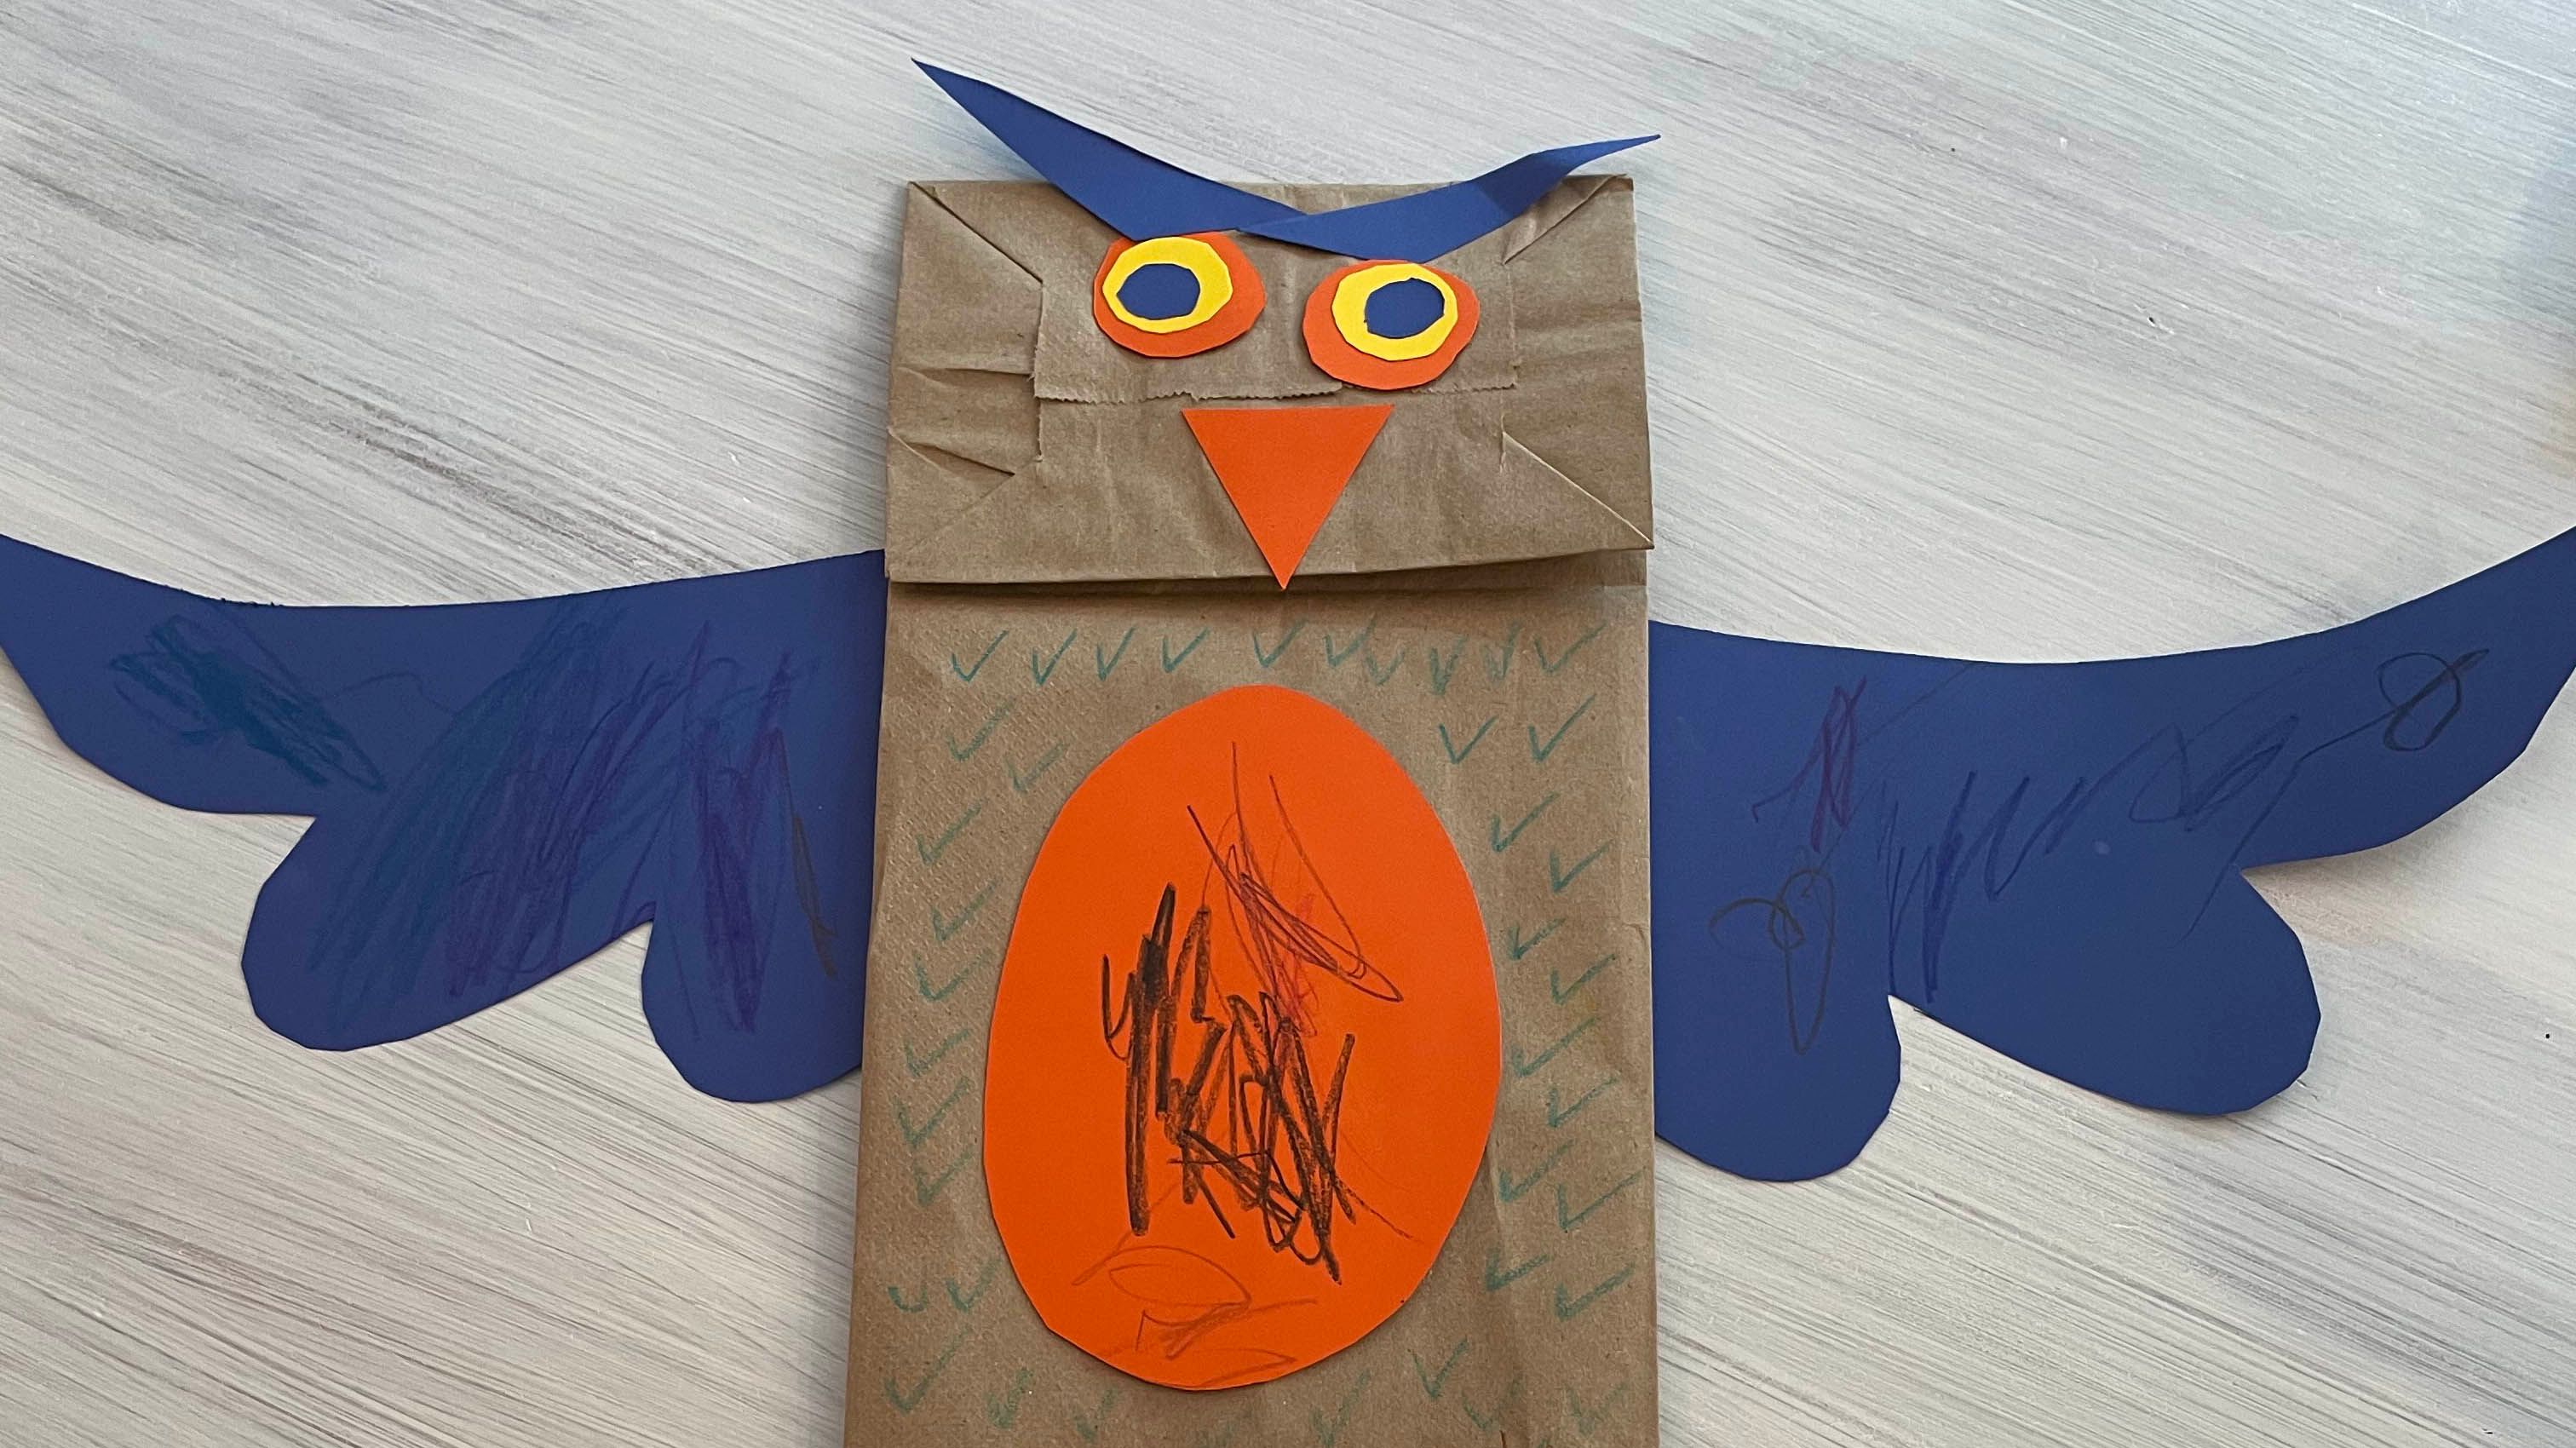 Owl made out of paper bag and other colorful cutouts